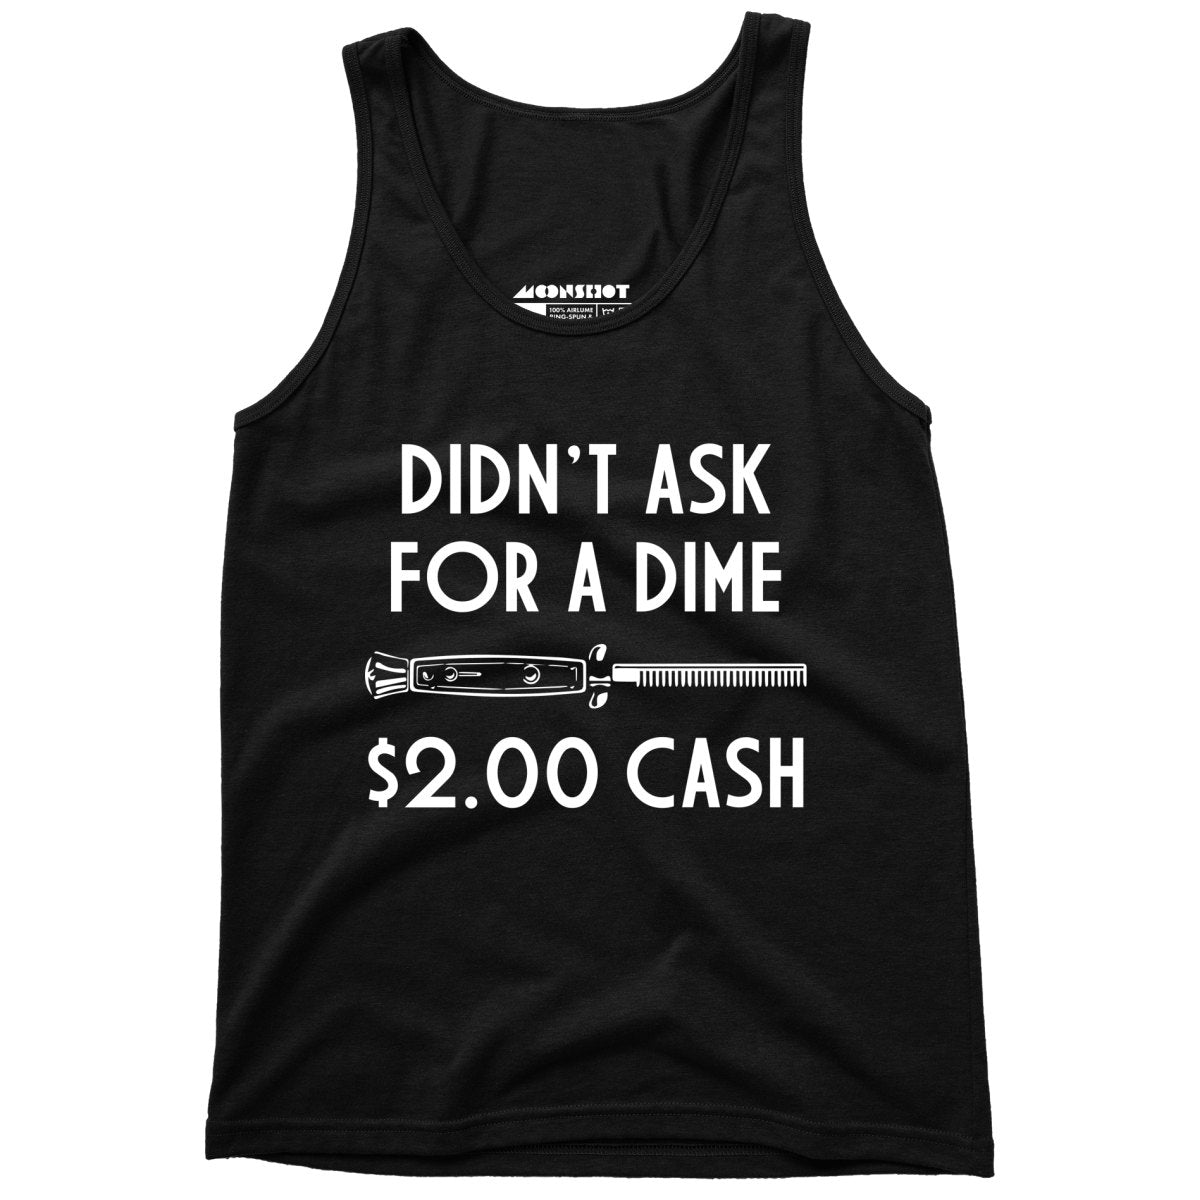 Didn't Ask For a Dime - Unisex Tank Top